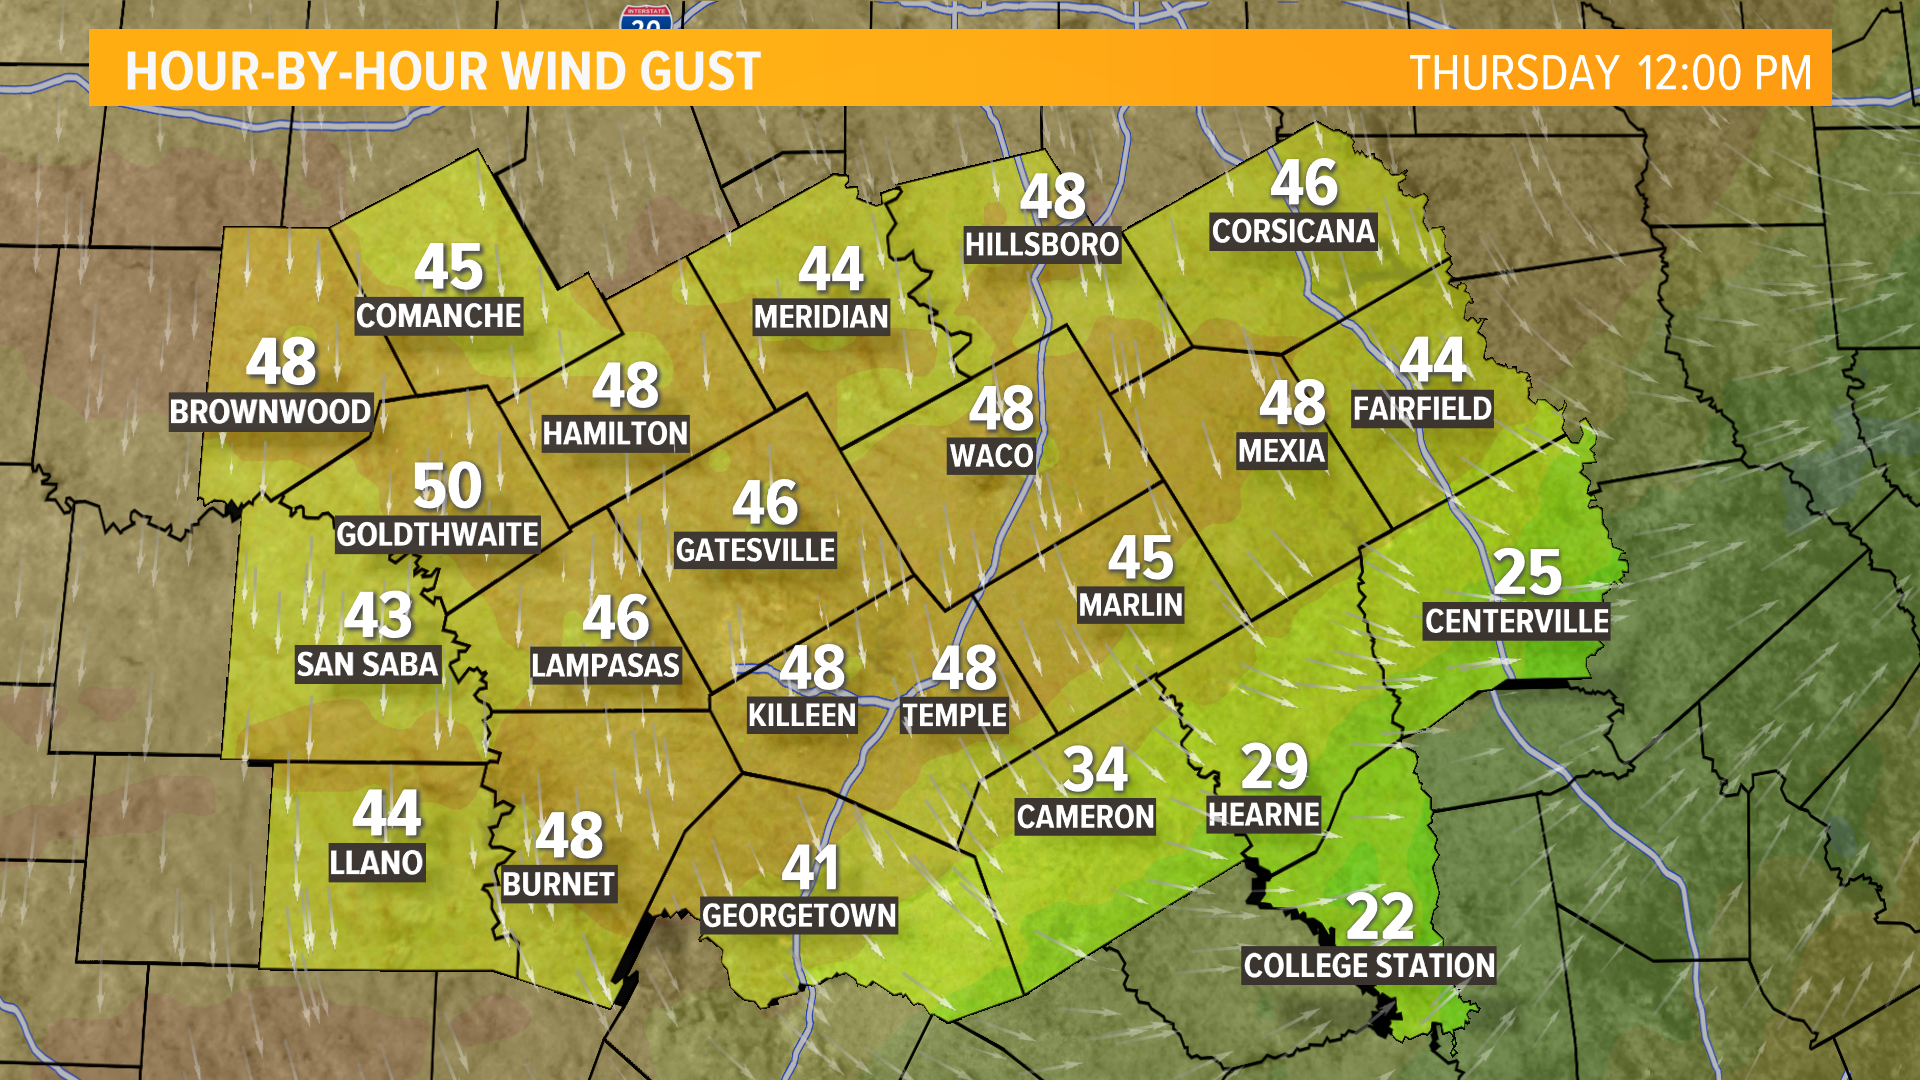 Sustained winds will be 15 to 25 mph, with wind gusts up to 40 and even 50 mph.